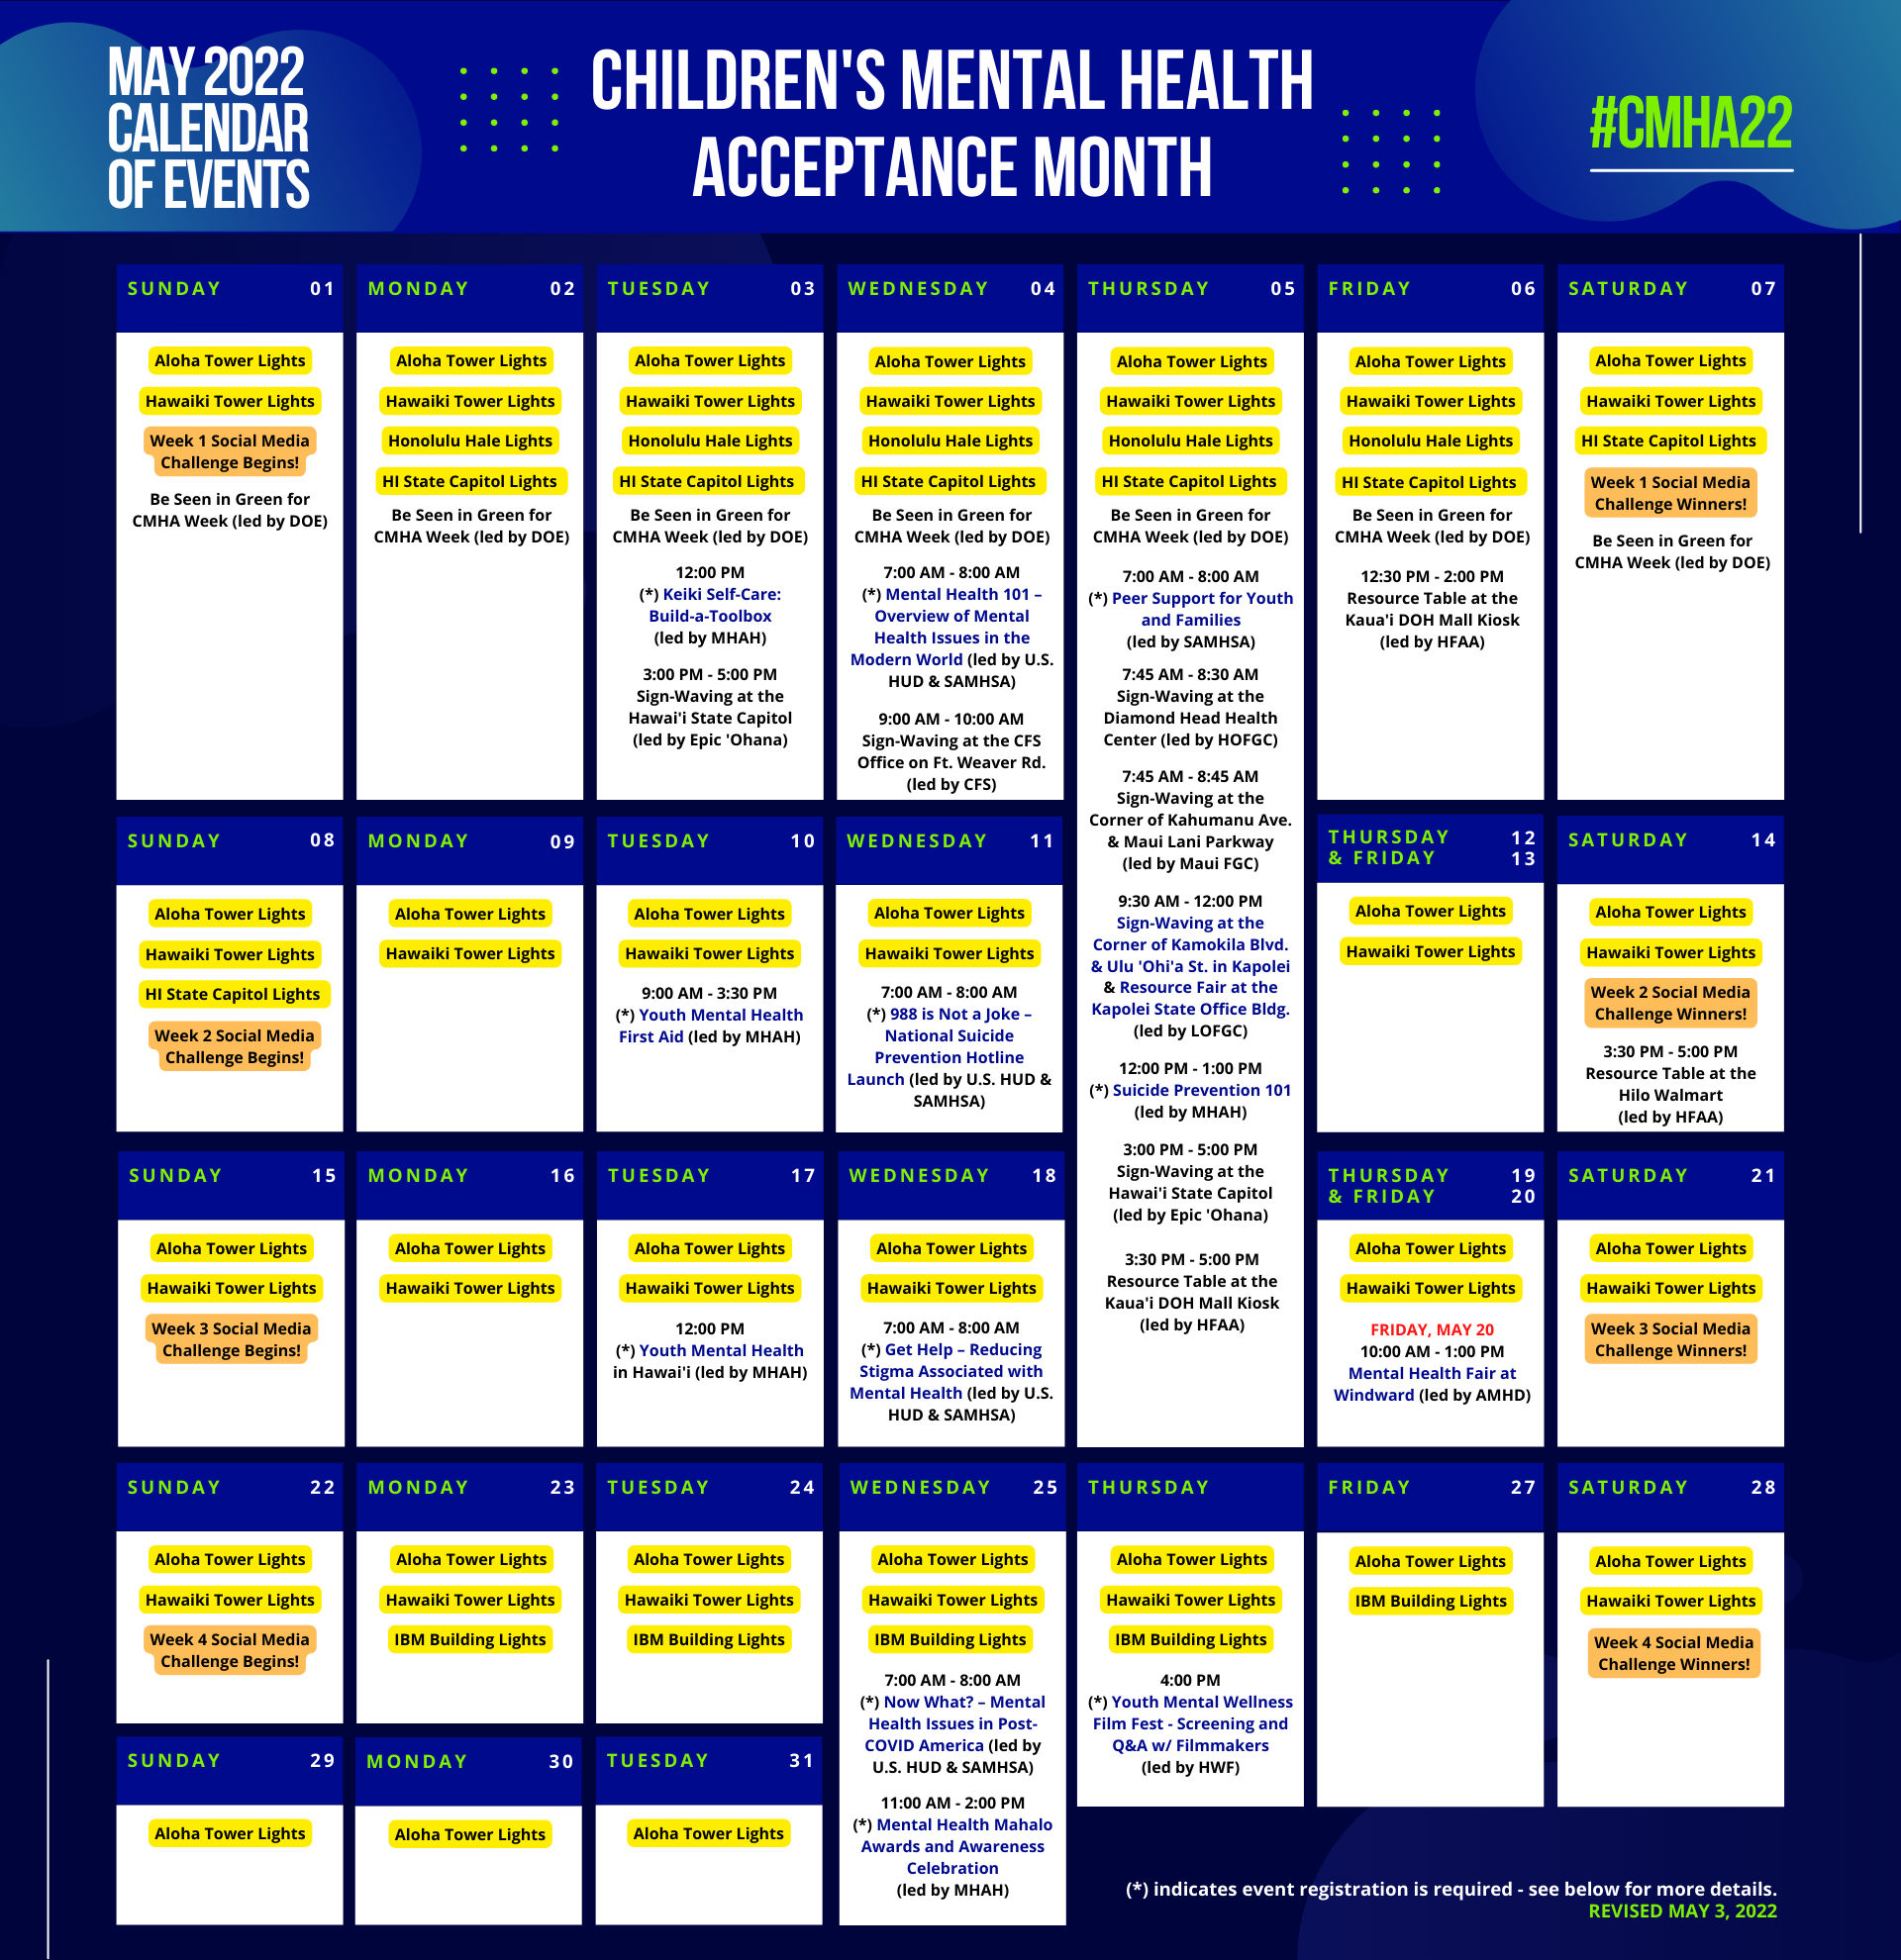 2022 Children's Mental Health Acceptance Calendar of Events (as of May 3, 2022)